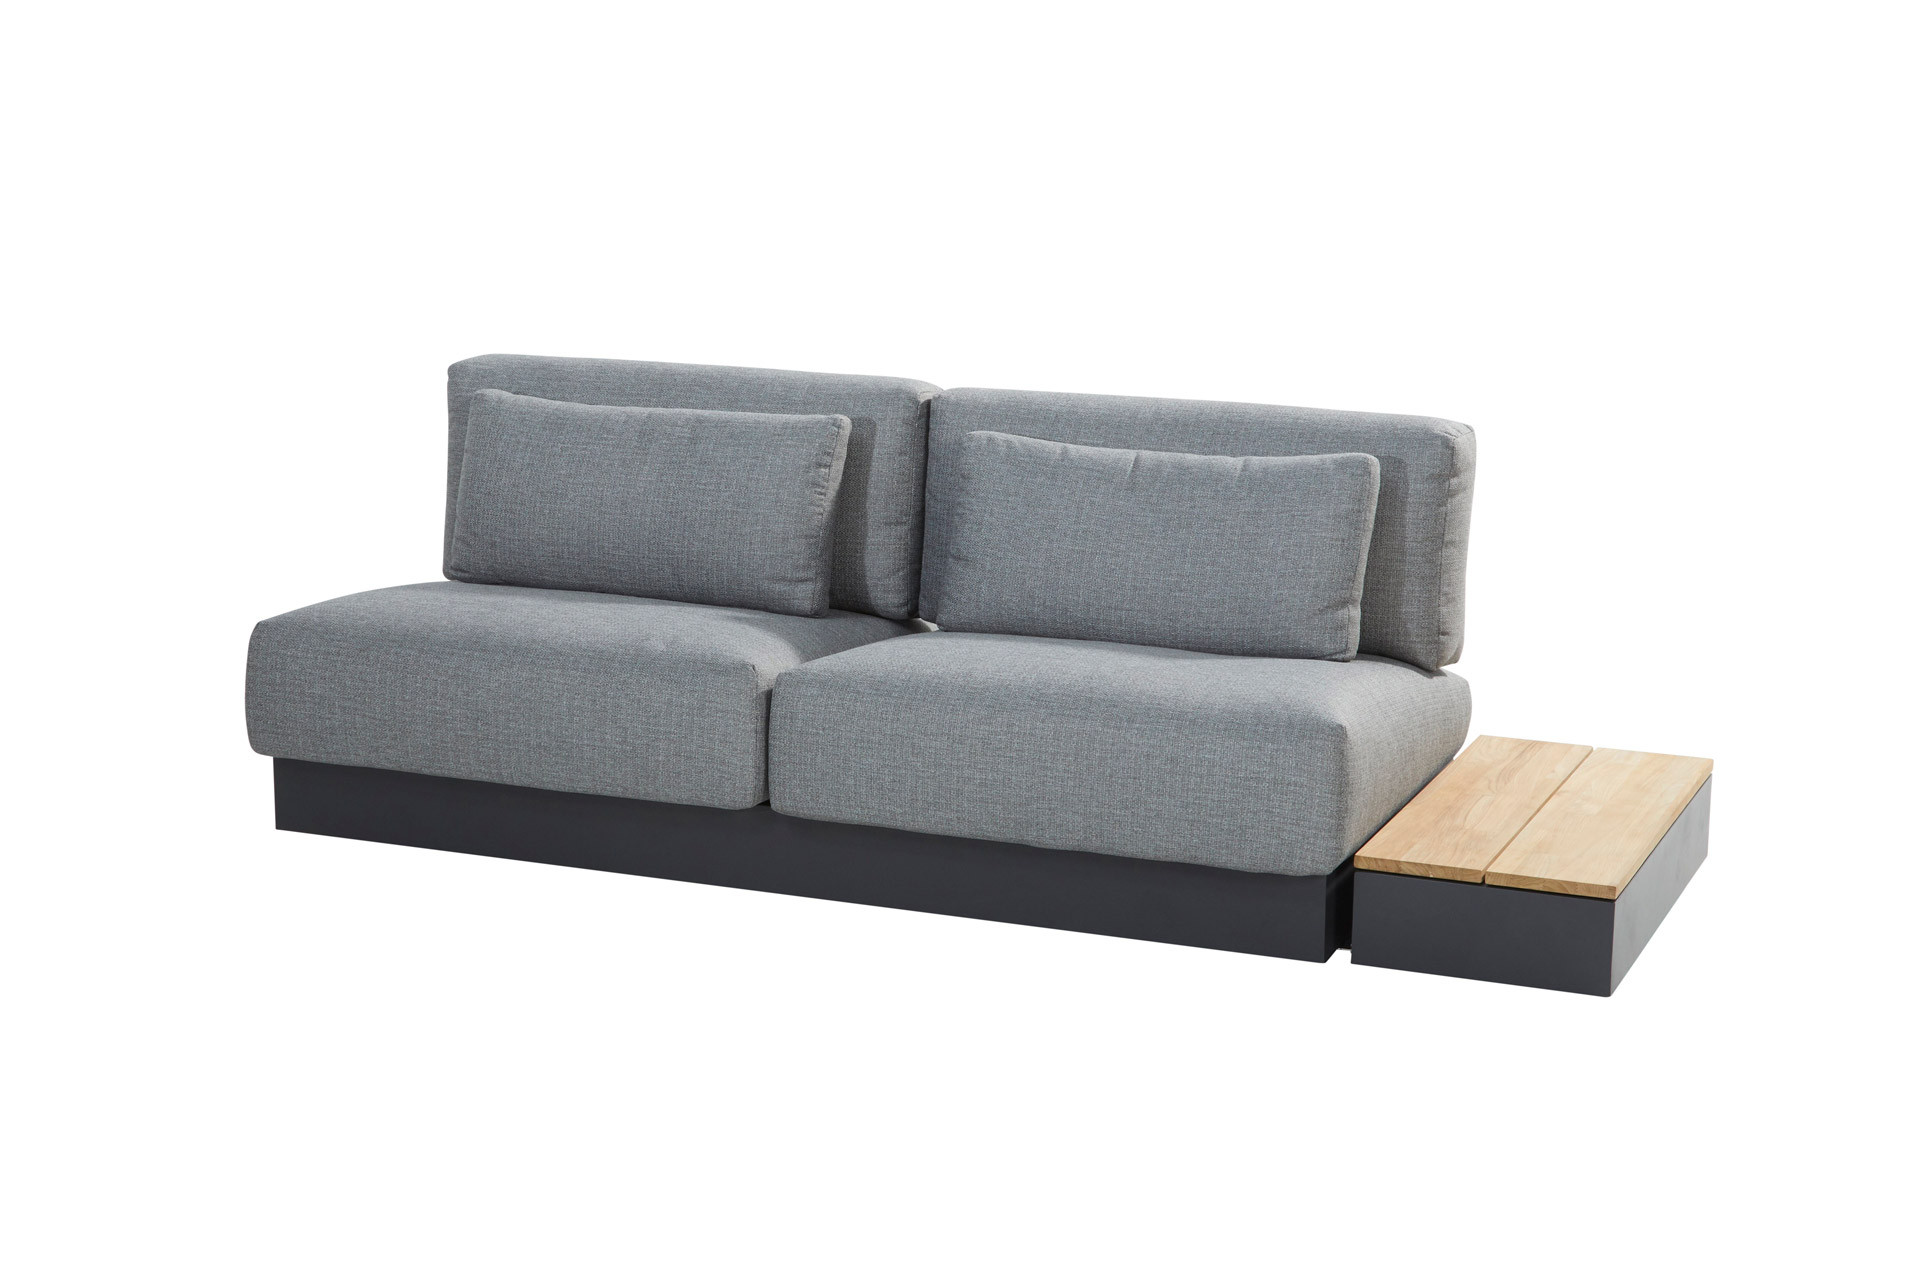 Ibiza modular 2-seater with left side table